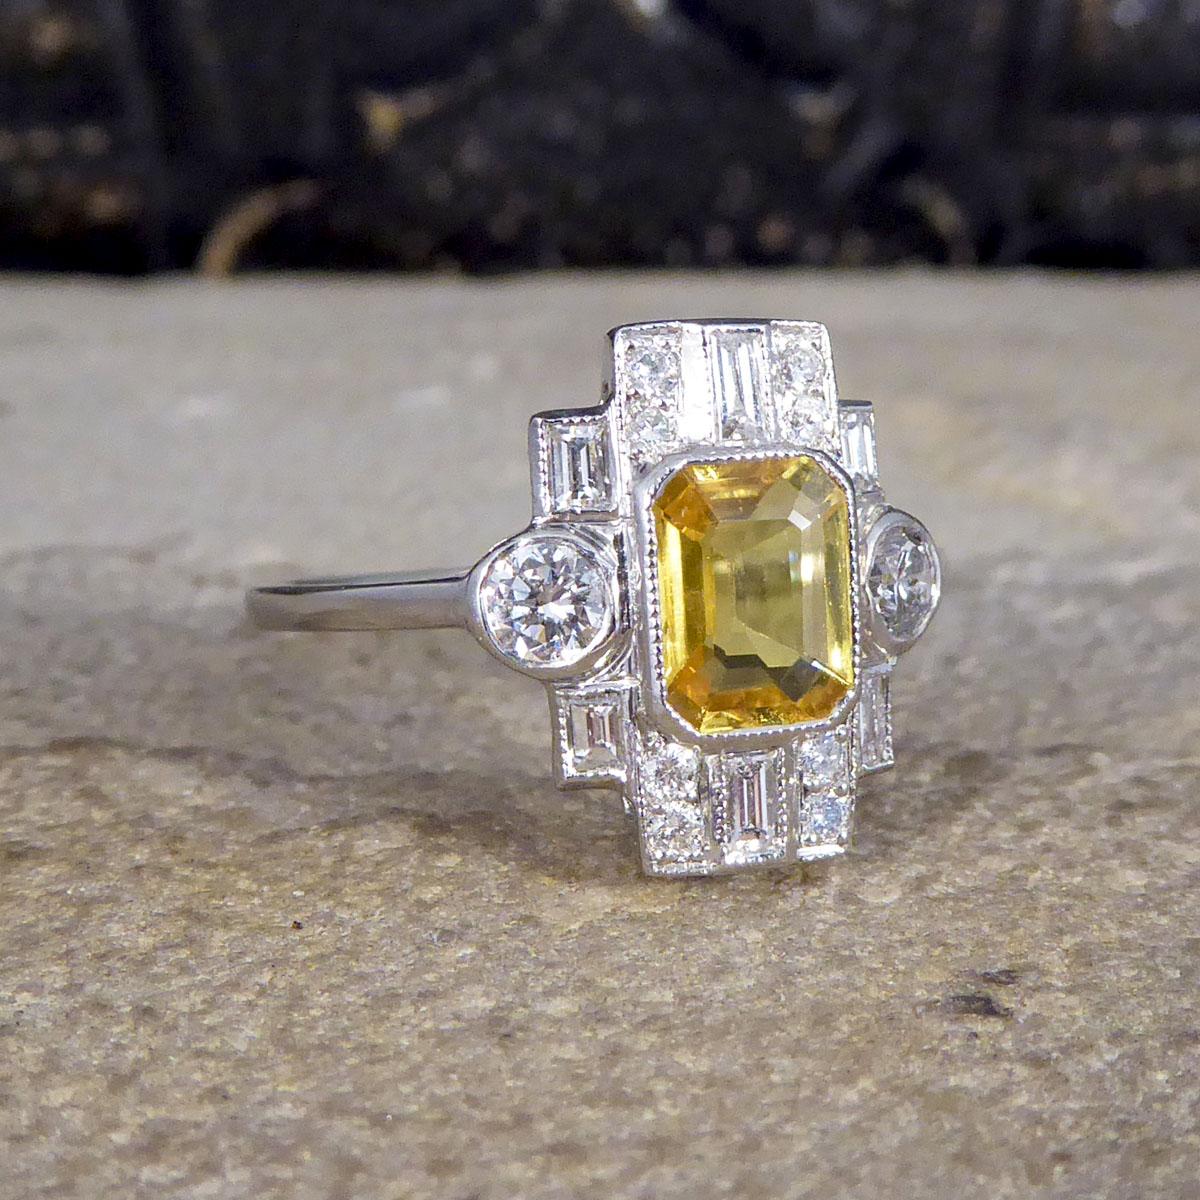 This gorgeous ring is modern but has been crafted in an Art Deco style with very distinct similarities and qualities of this era. Featuring a gorgeous Emerald Cut Yellow Sapphire cut weighing 1.10ct, this ring shows such quality through the